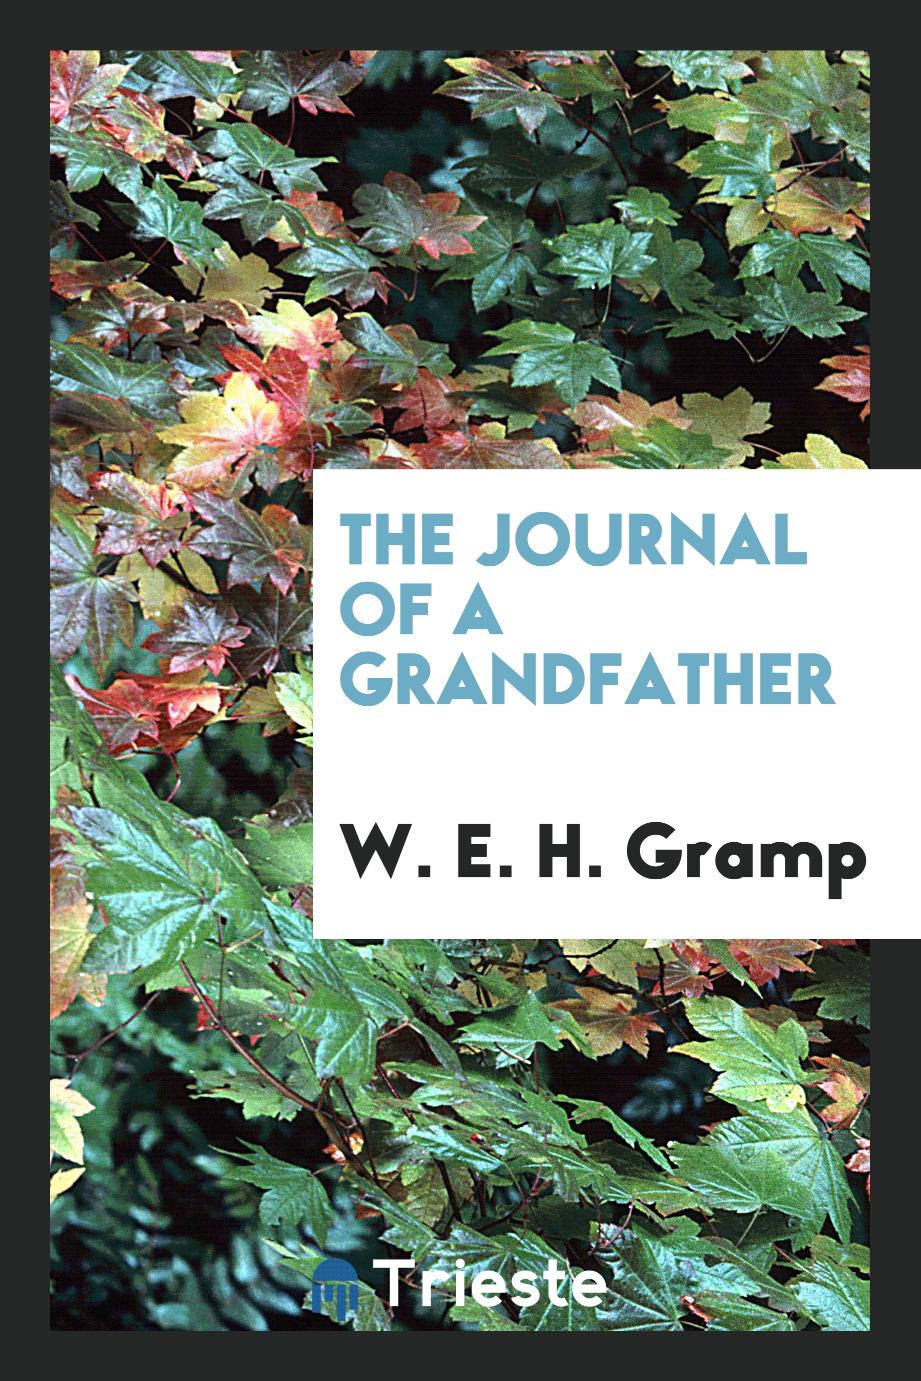 The journal of a grandfather